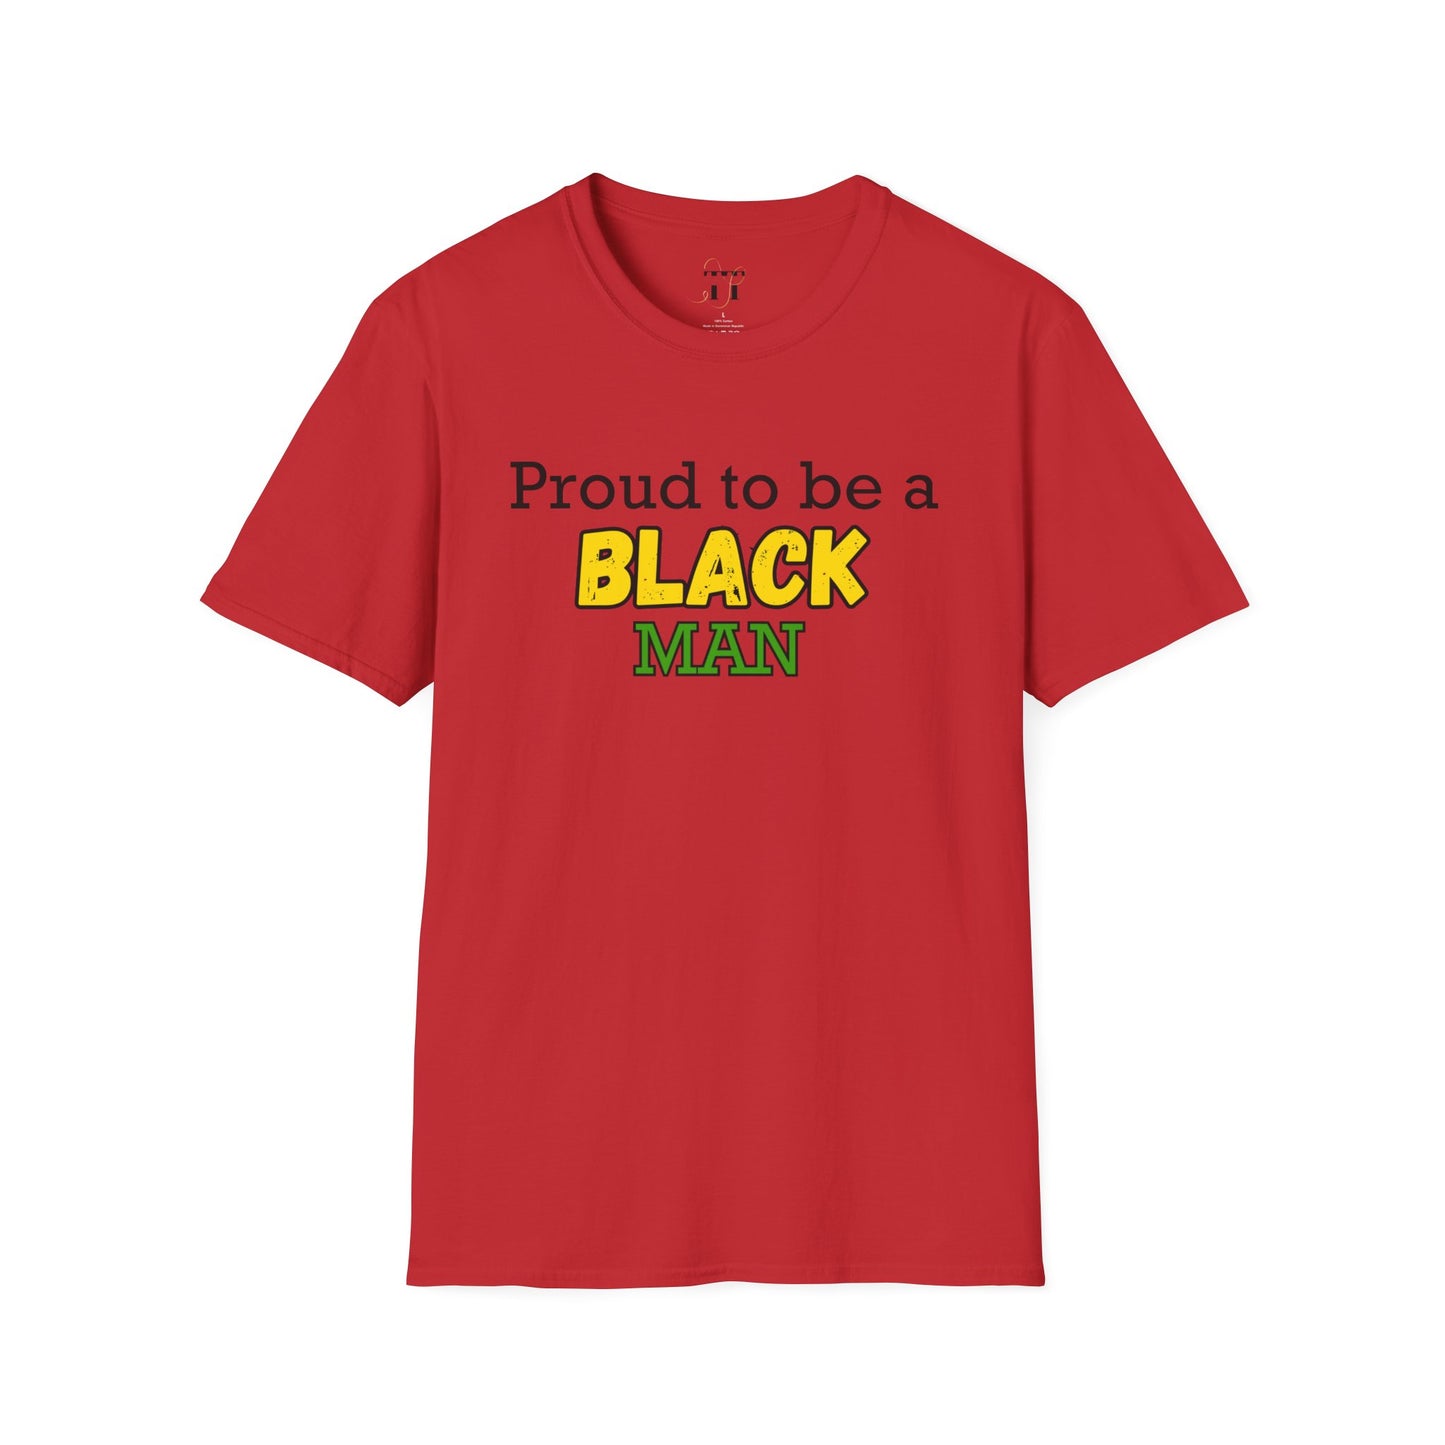 Red t-shirt from Triumph Tees with bold text: "Proud to be a black man, even more proud to be a Christian man. Shop now and scream your faith out loud!